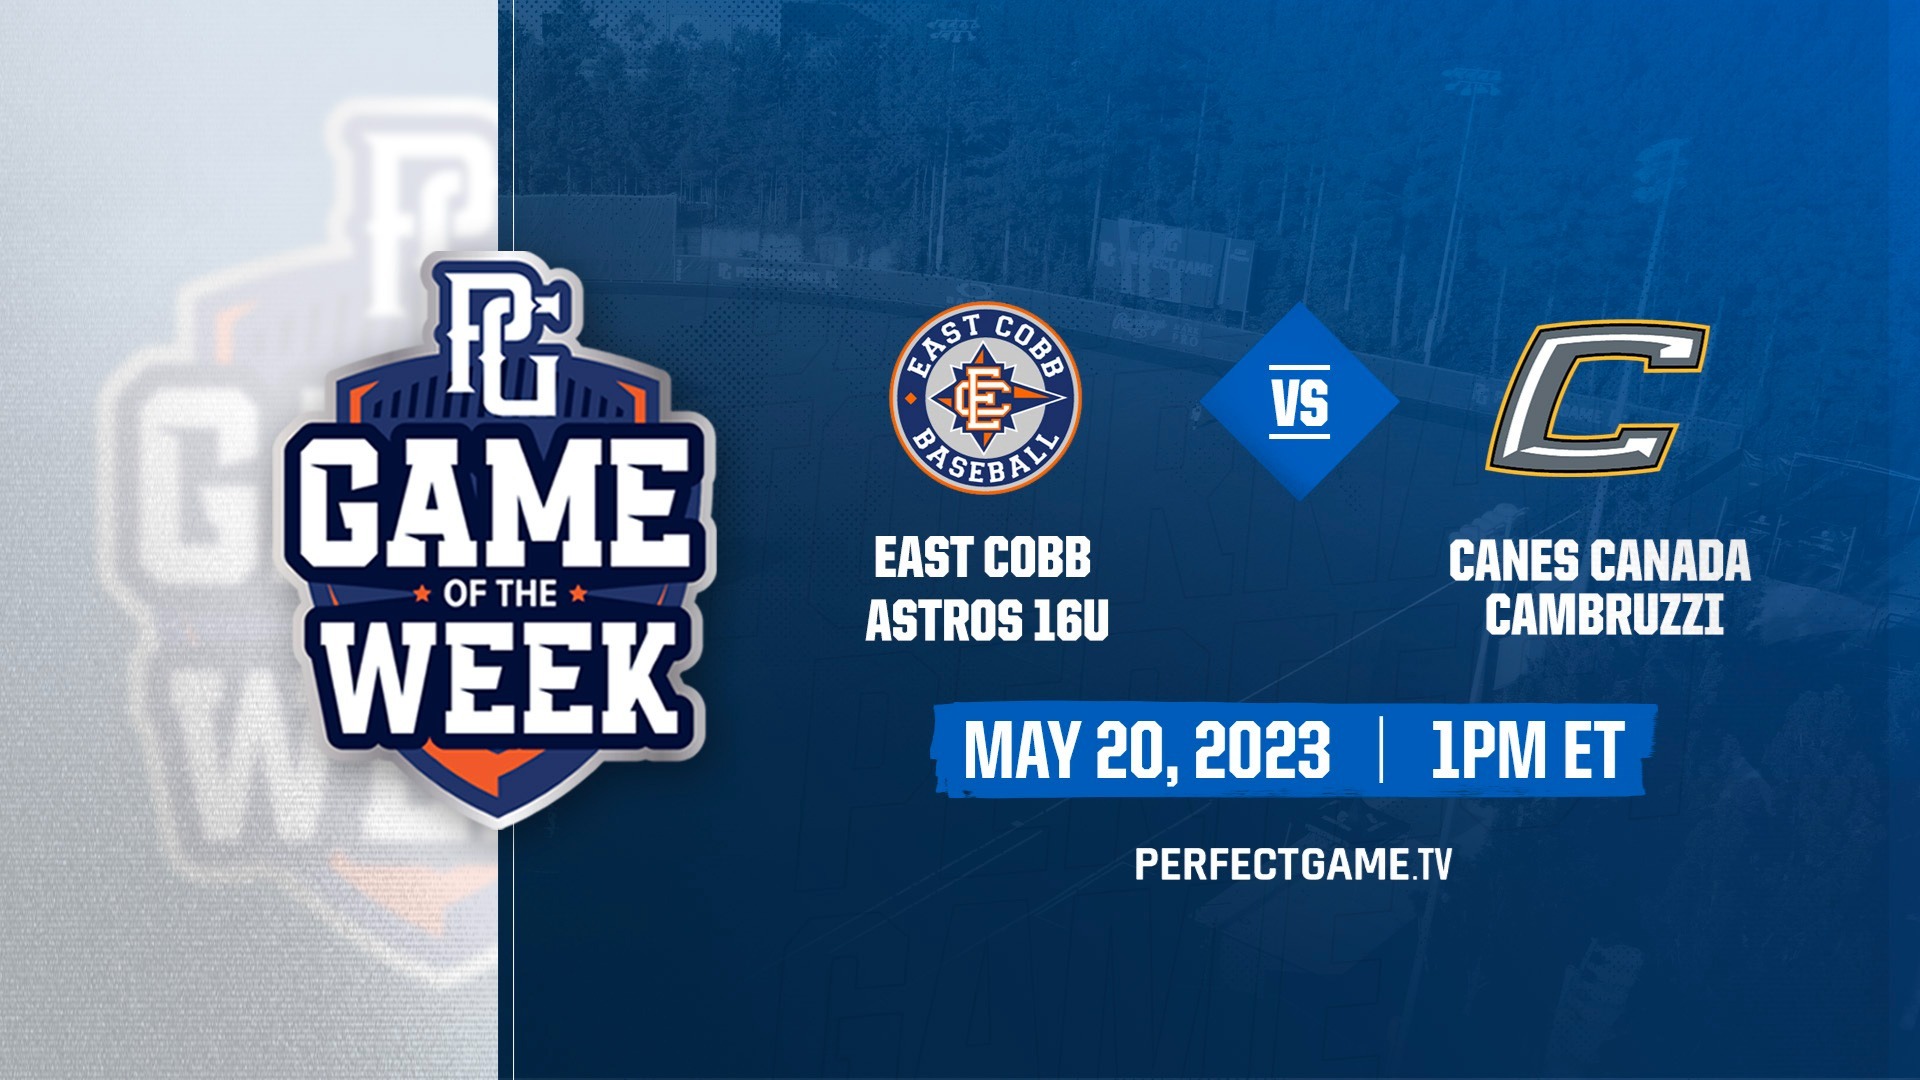 2023 PG Game of the Week - East Cobb Astros vs. Canes Canada (17u ...